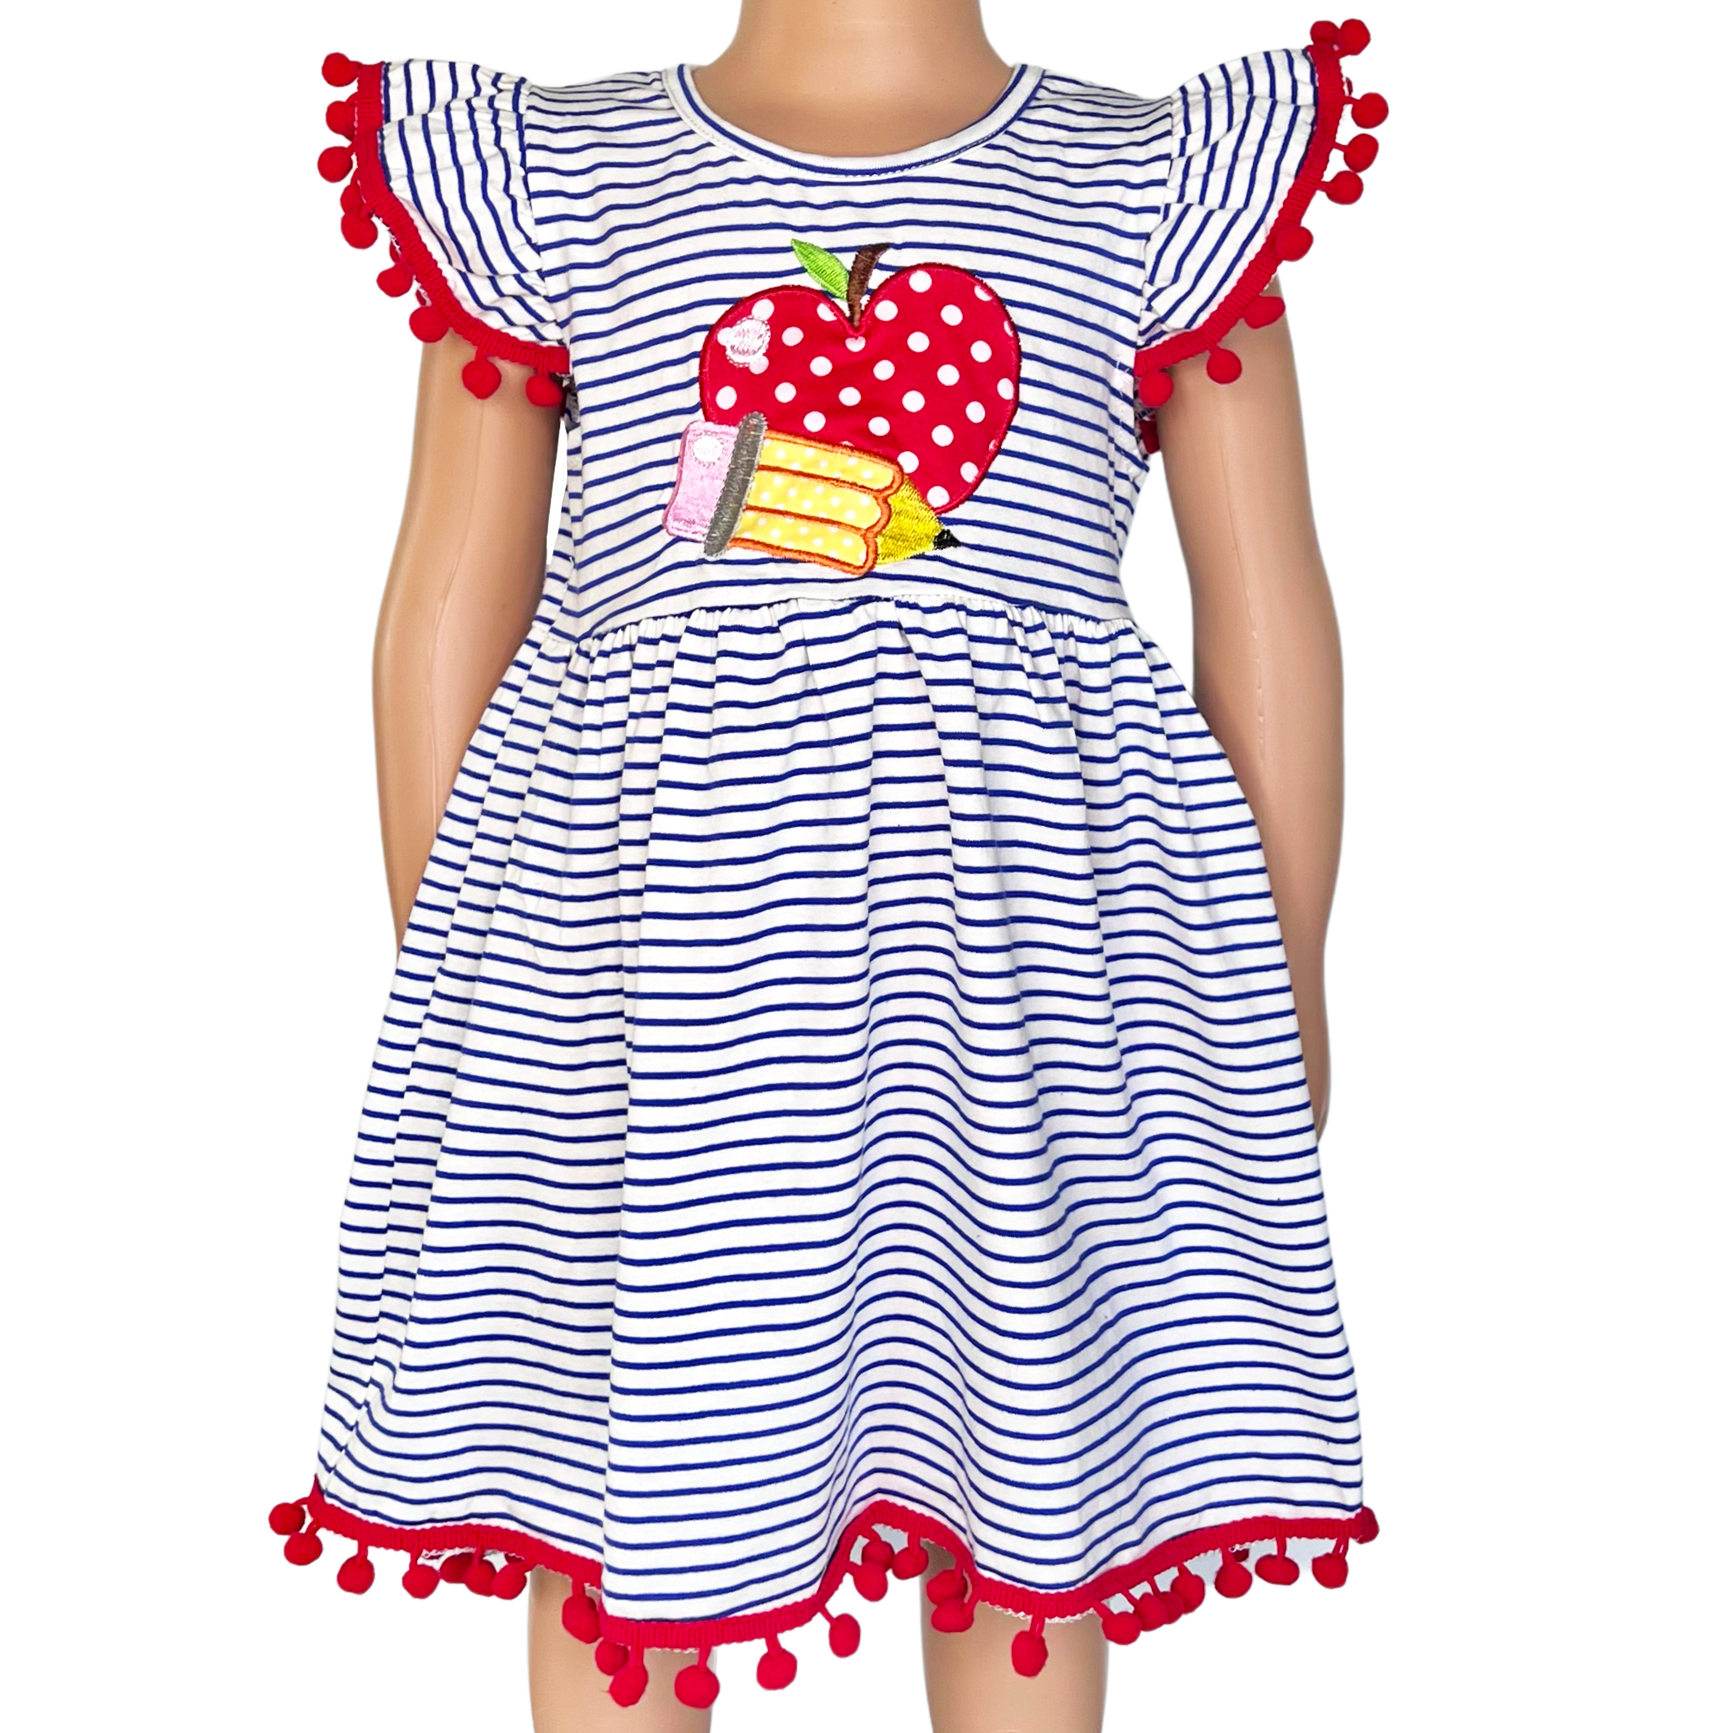 Girls Back to School Dress with Apple and Pencil applique-0